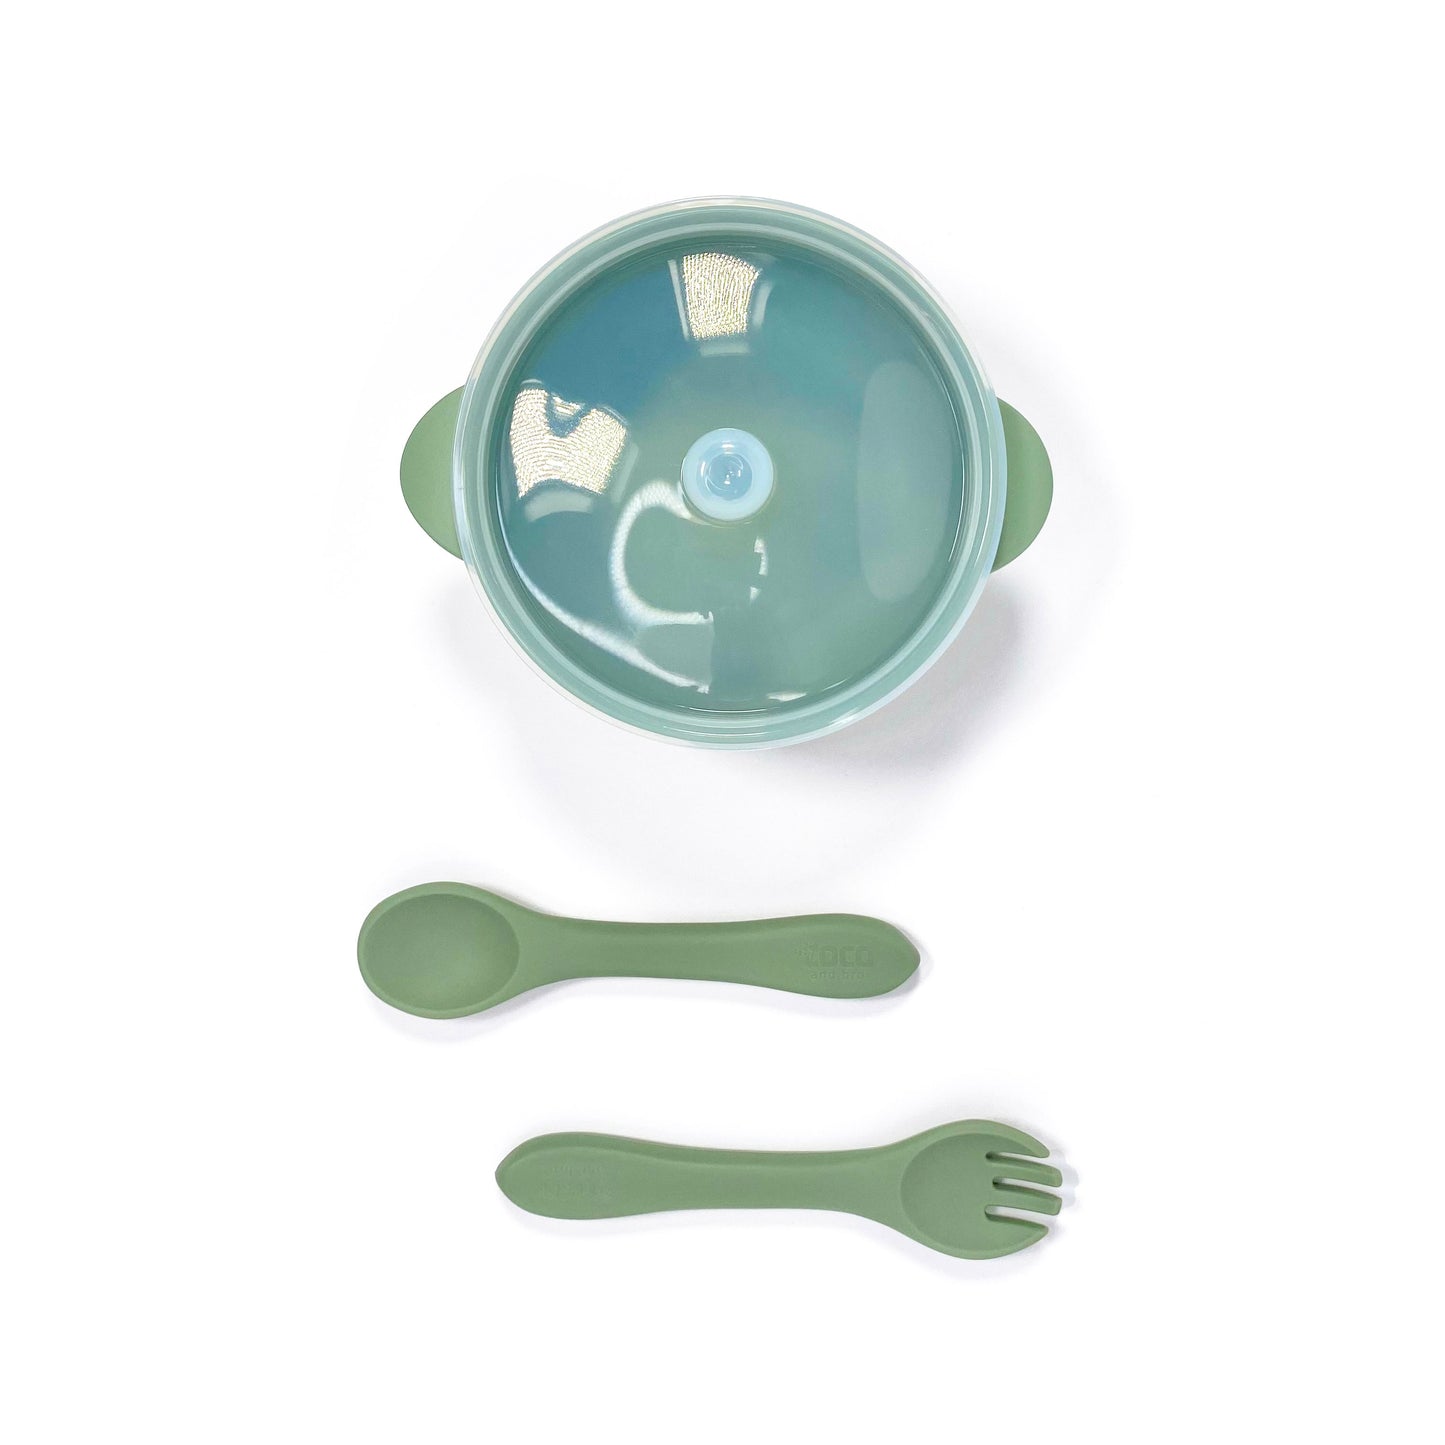 A forest green silicone children’s feeding set, including silicone bowl with lid and matching silicone cutlery. Image shows the bowl and cutlery from above, with lid attached.